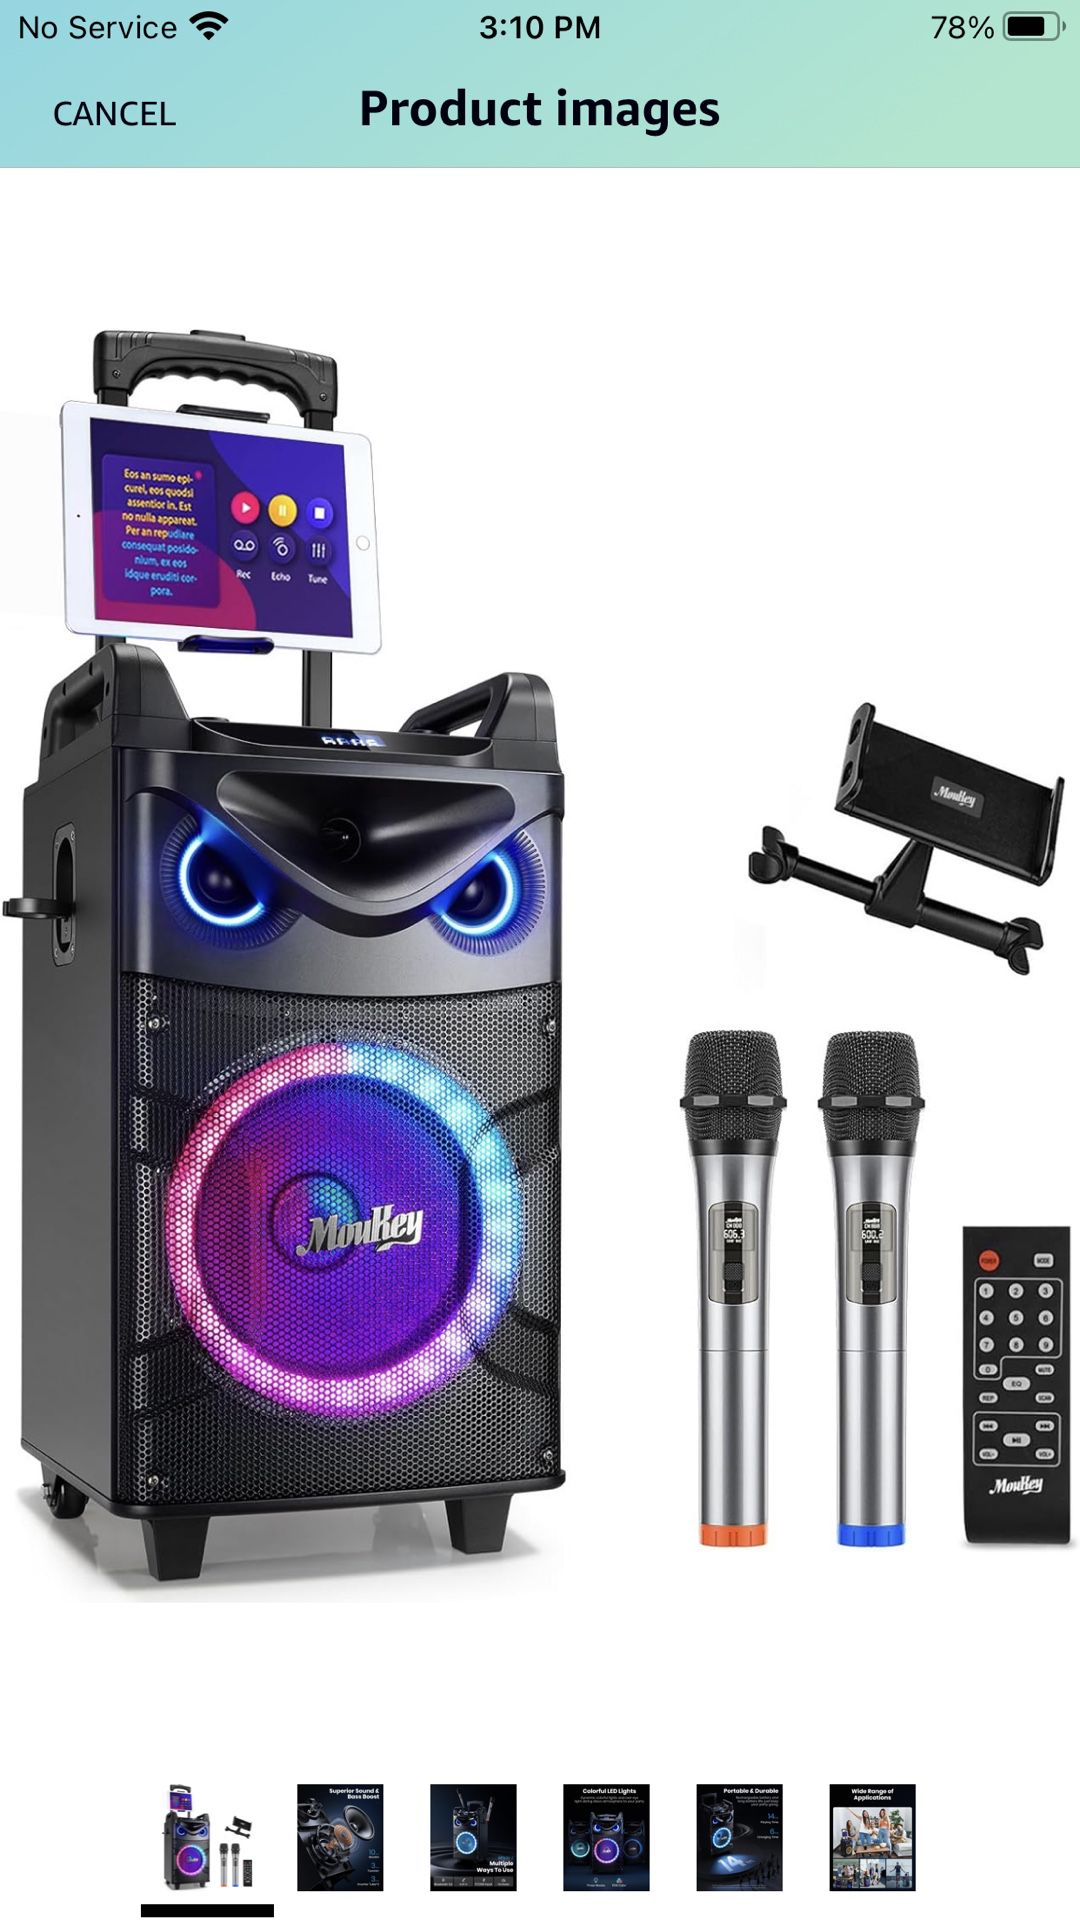 Moukey Karaoke Machine, 10" Woofer Portable PA System, Bluetooth Speaker with 2 Wireless Microphones, Lyrics Display Tablet Holder, Party Lights & Ech